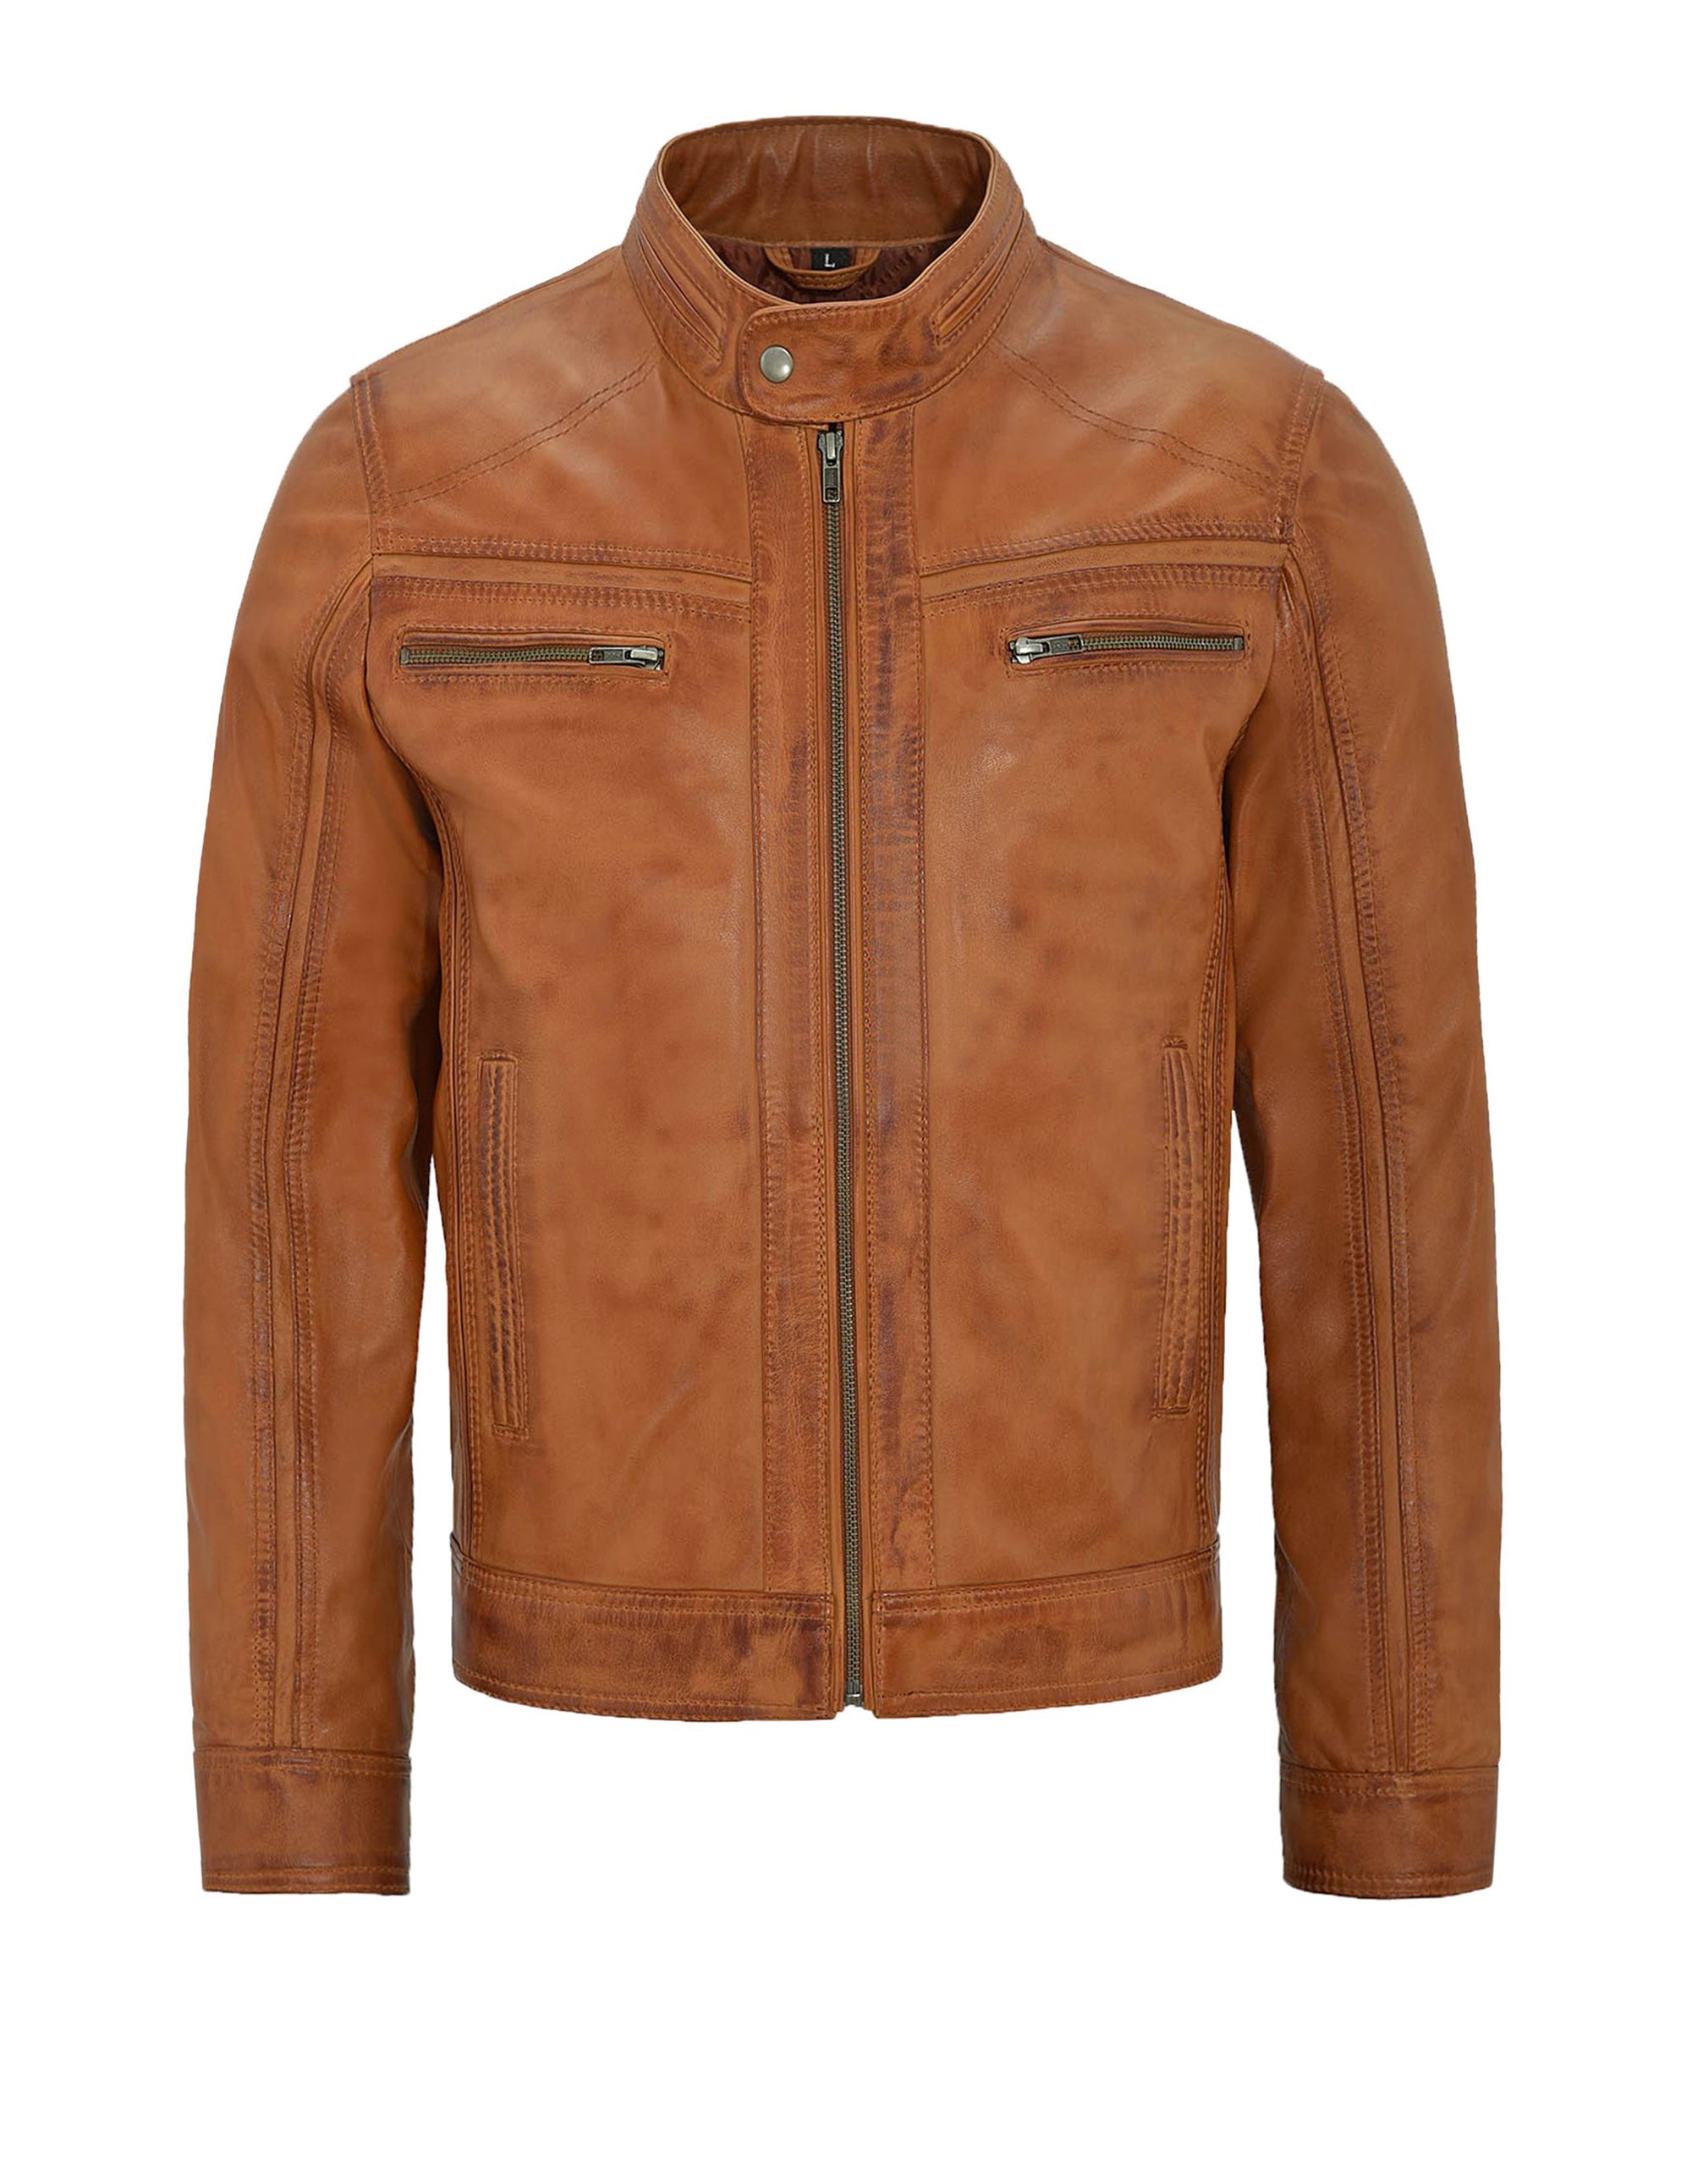 Distressed Tan Leather Motorcycle Jacket For Men